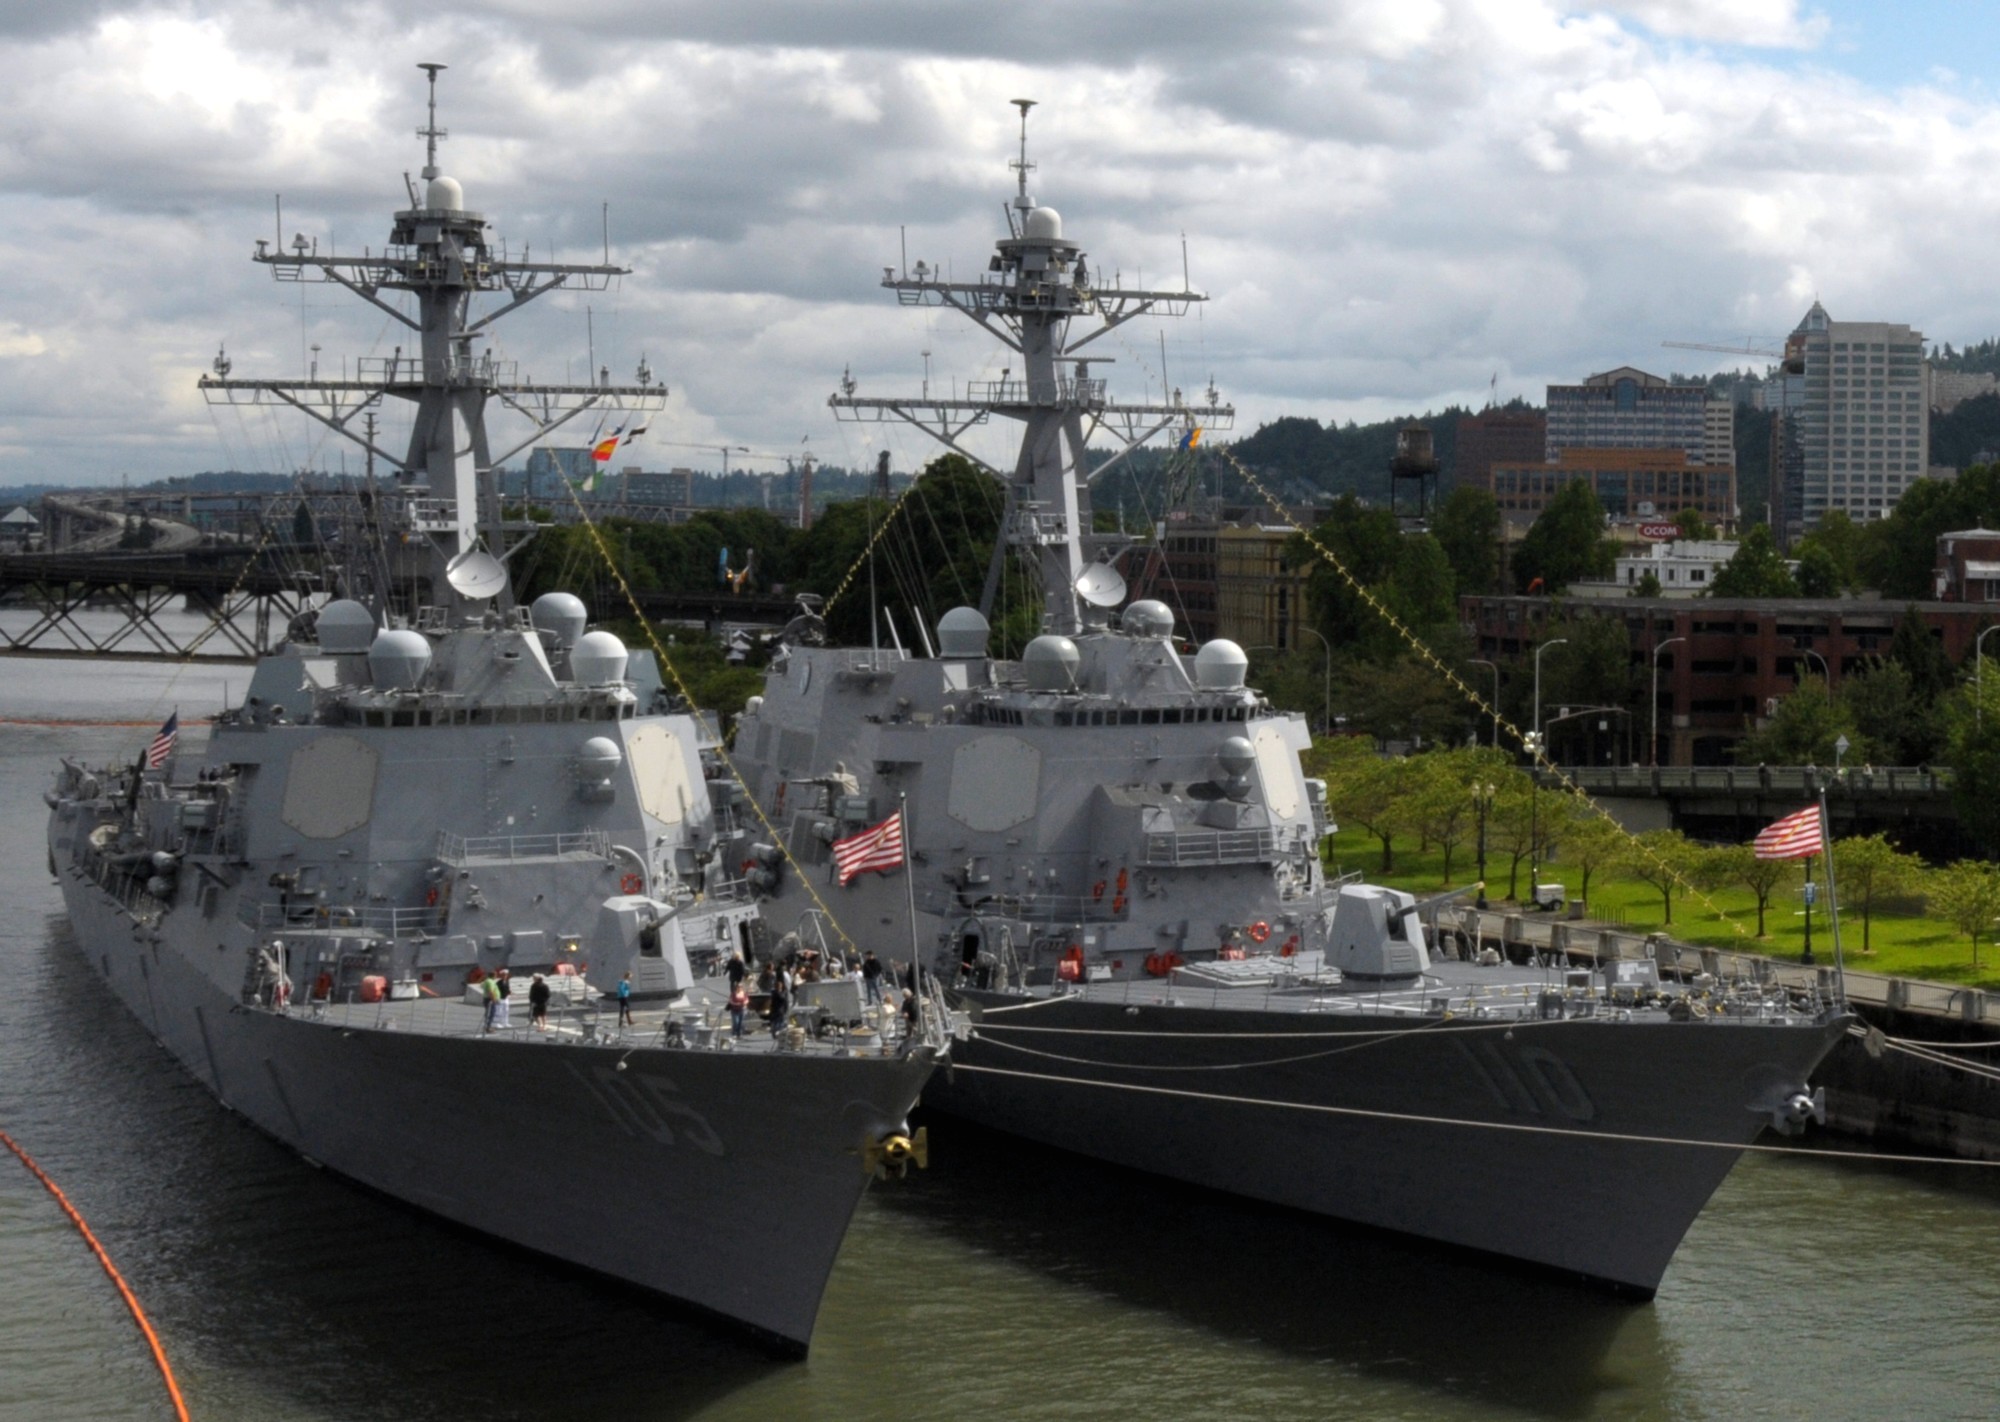 ddg-110 uss william p. lawrence arleigh burke class guided missile destroyer aegis us navy portland oregon 38p